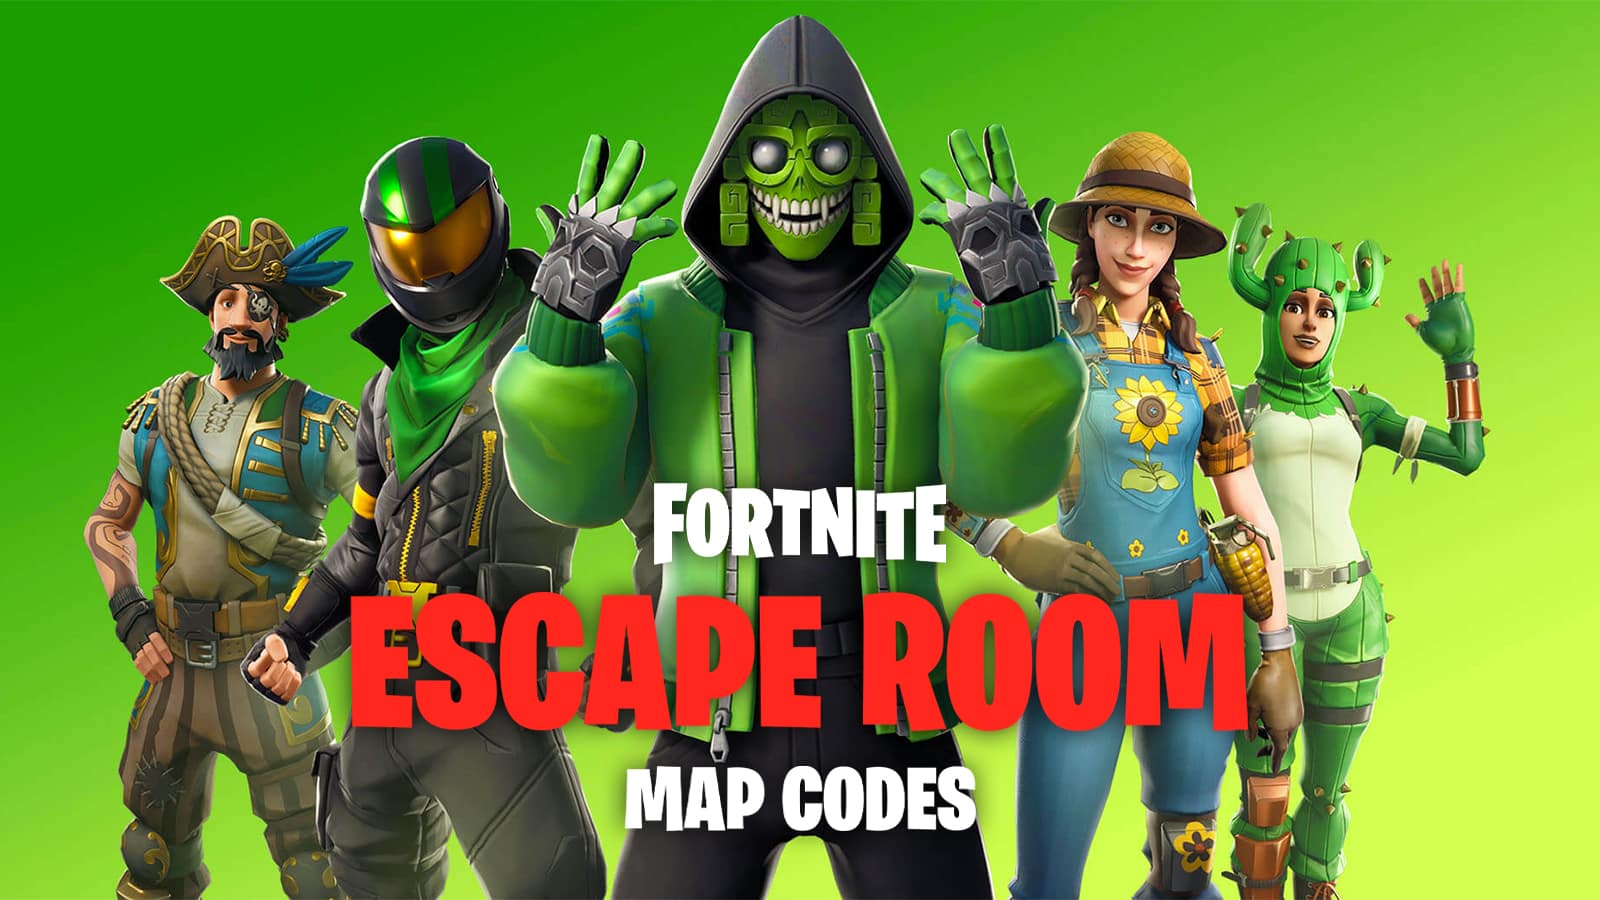 An image of Fortnite characters with the text 'escape room codes'